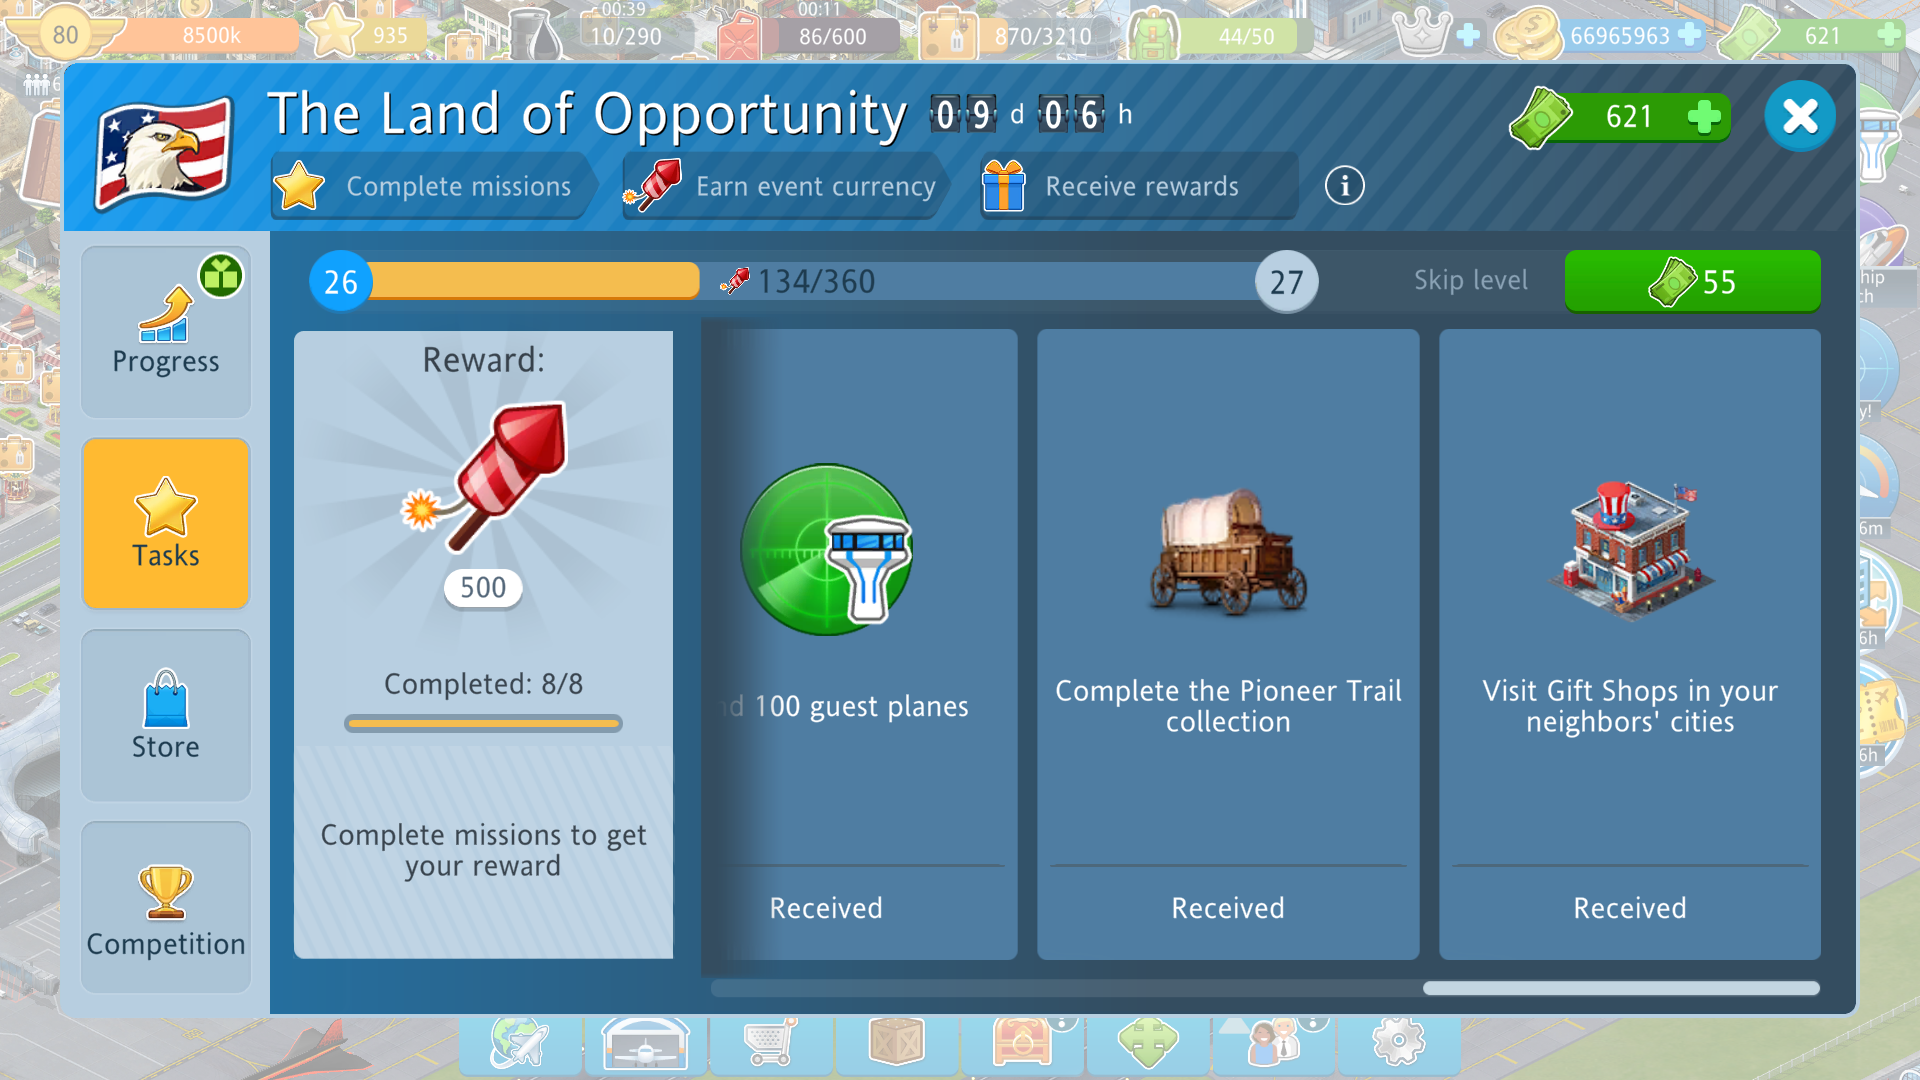 TheLandofOpportunity_2023_20ghozgdl_success_tasks.png